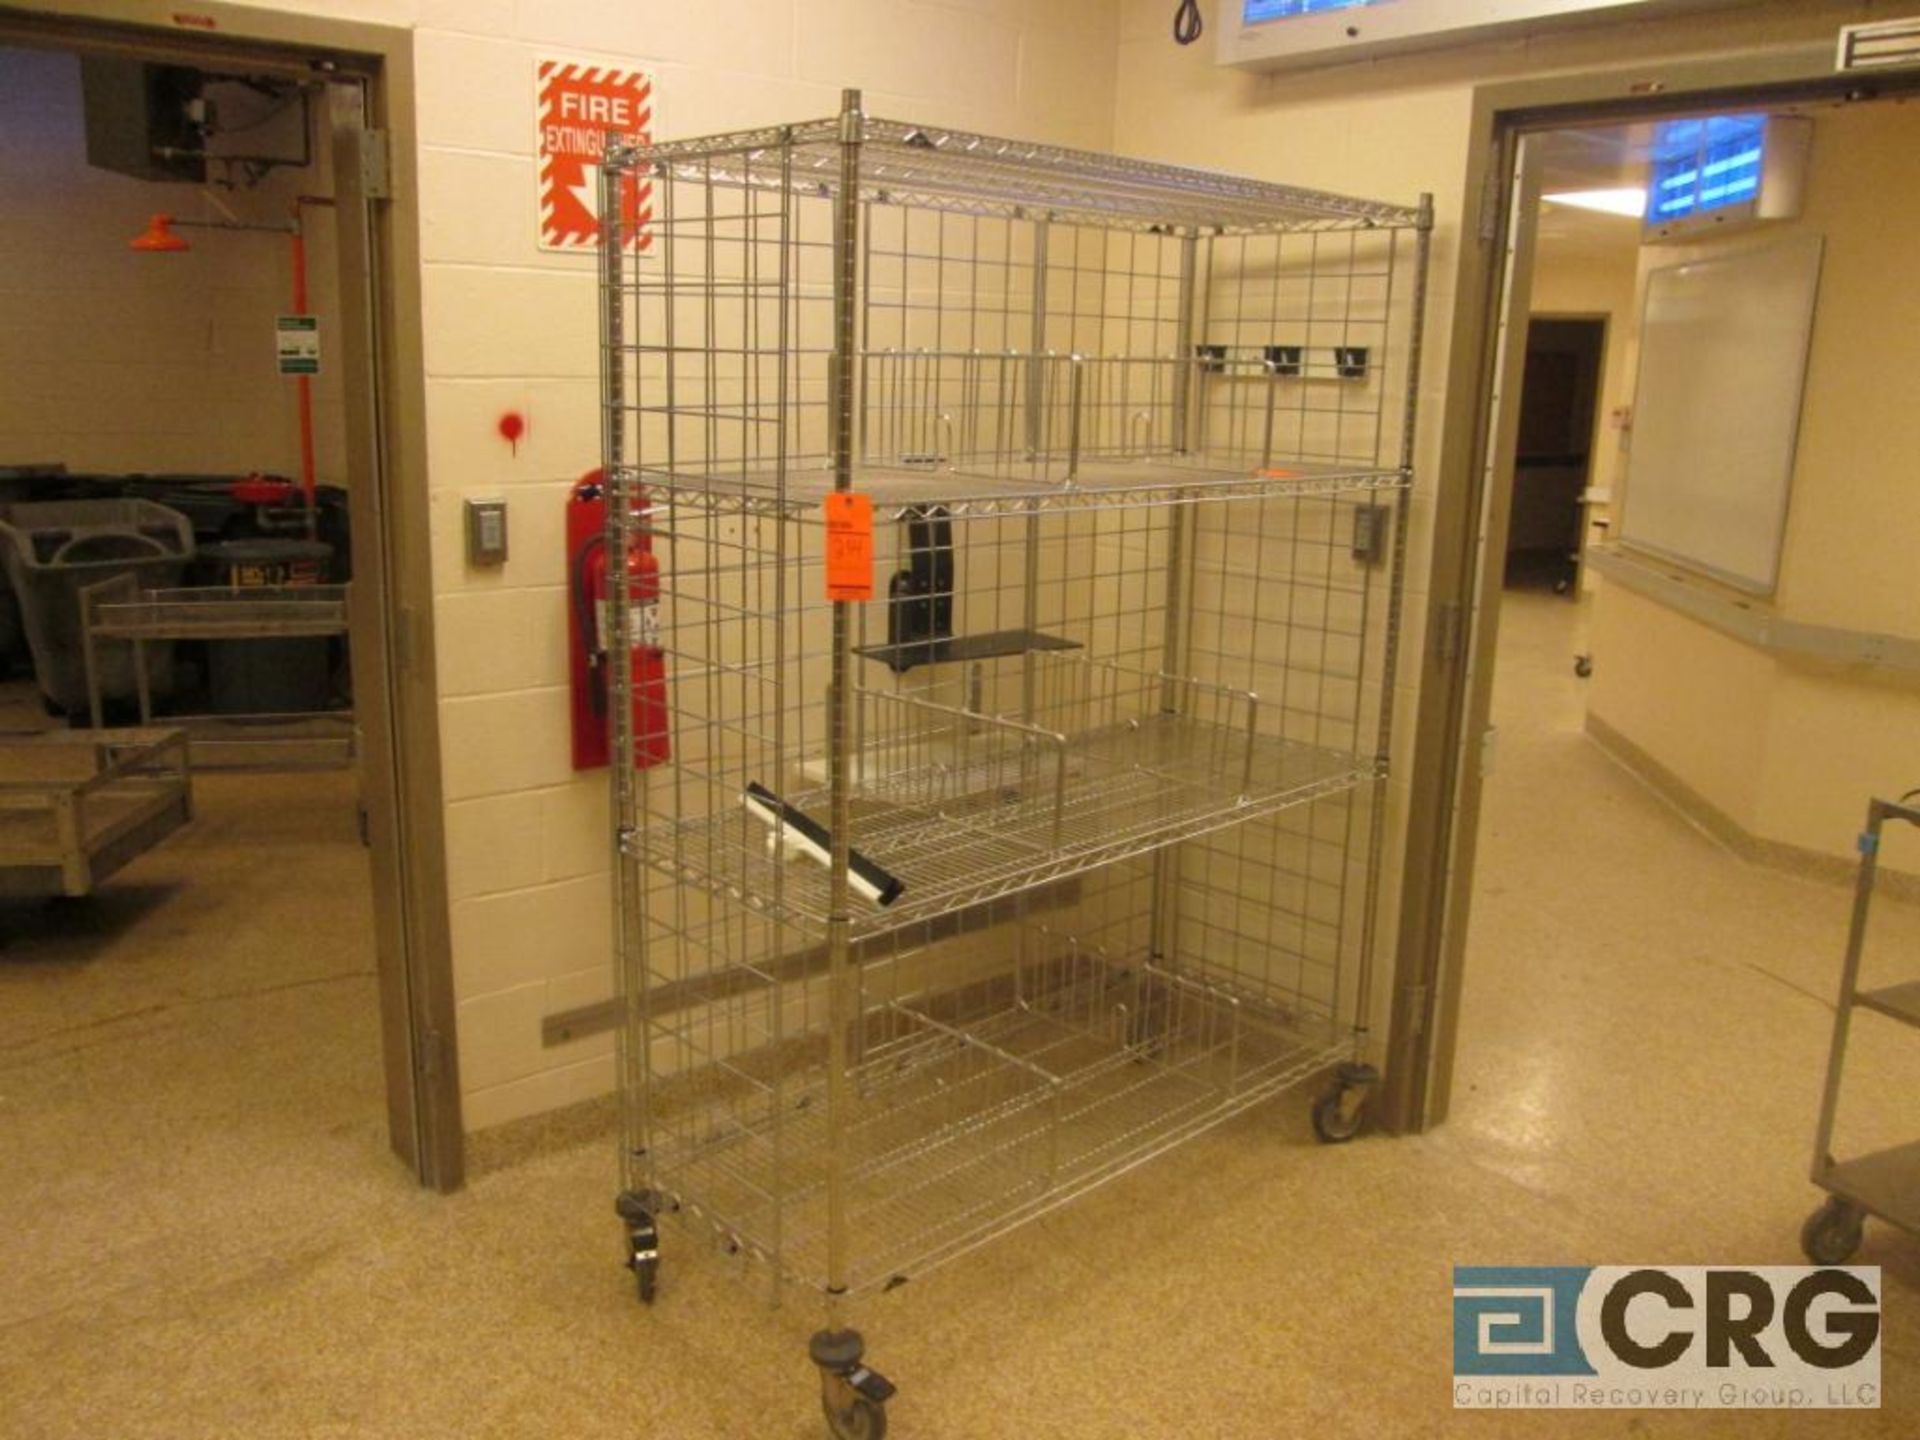 Lot, includes - 3 asst portable Metro racks with contents - asst coffee pots, dispensers, chafers,